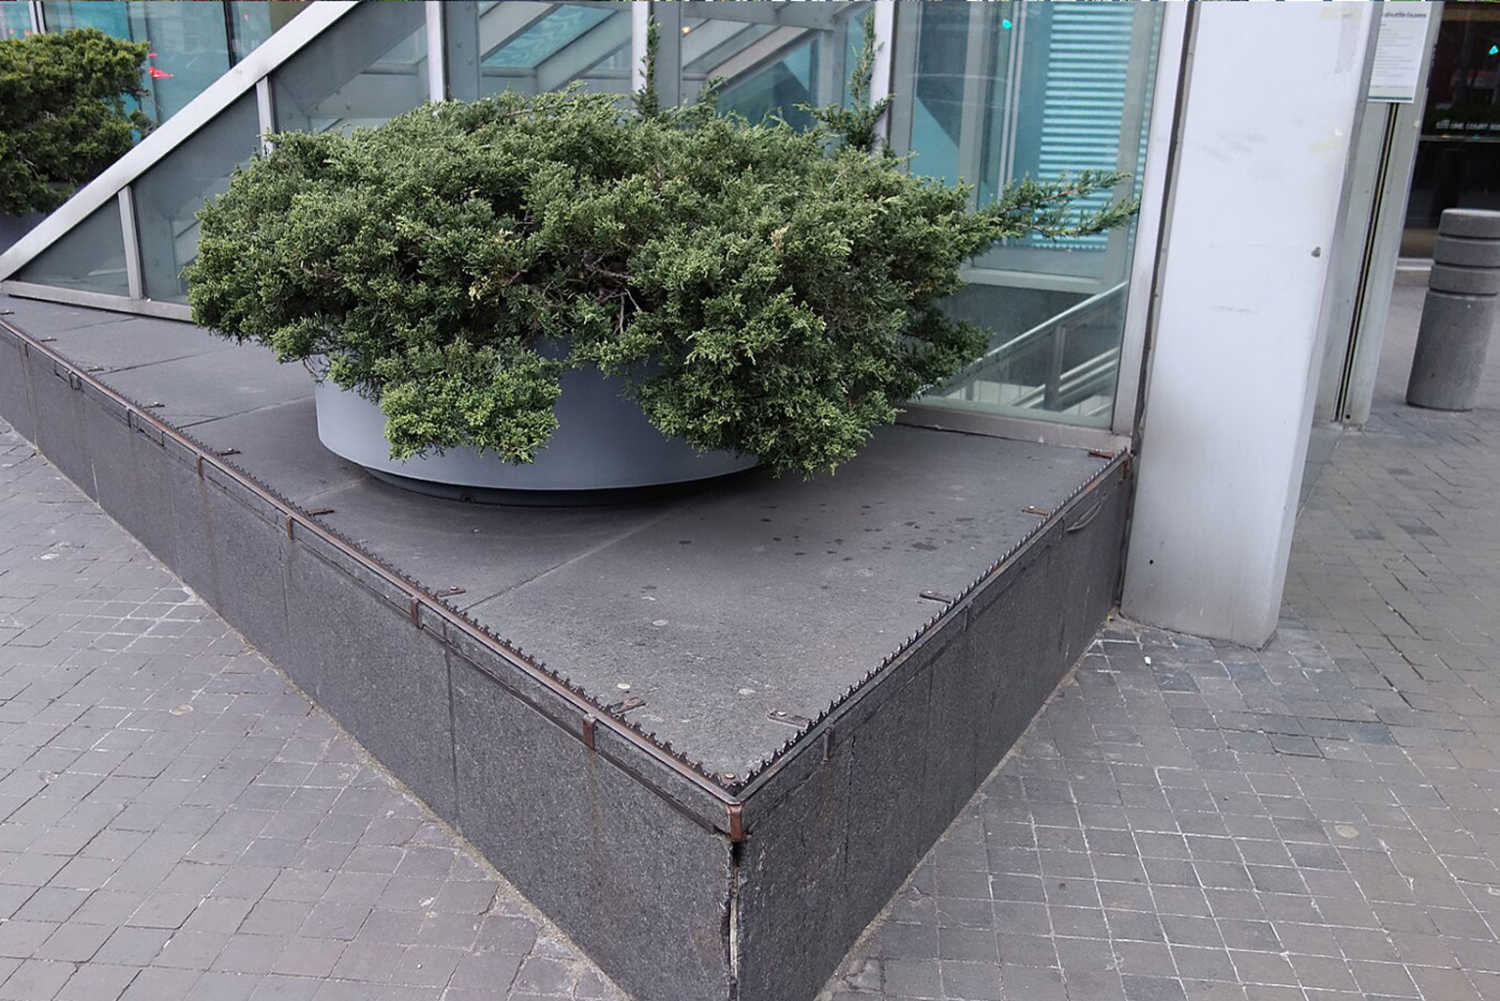 Examples of hostile architecture — spikes along this platform to prevent people from sitting. Credit: Tdorante10 Wikimedia Commons